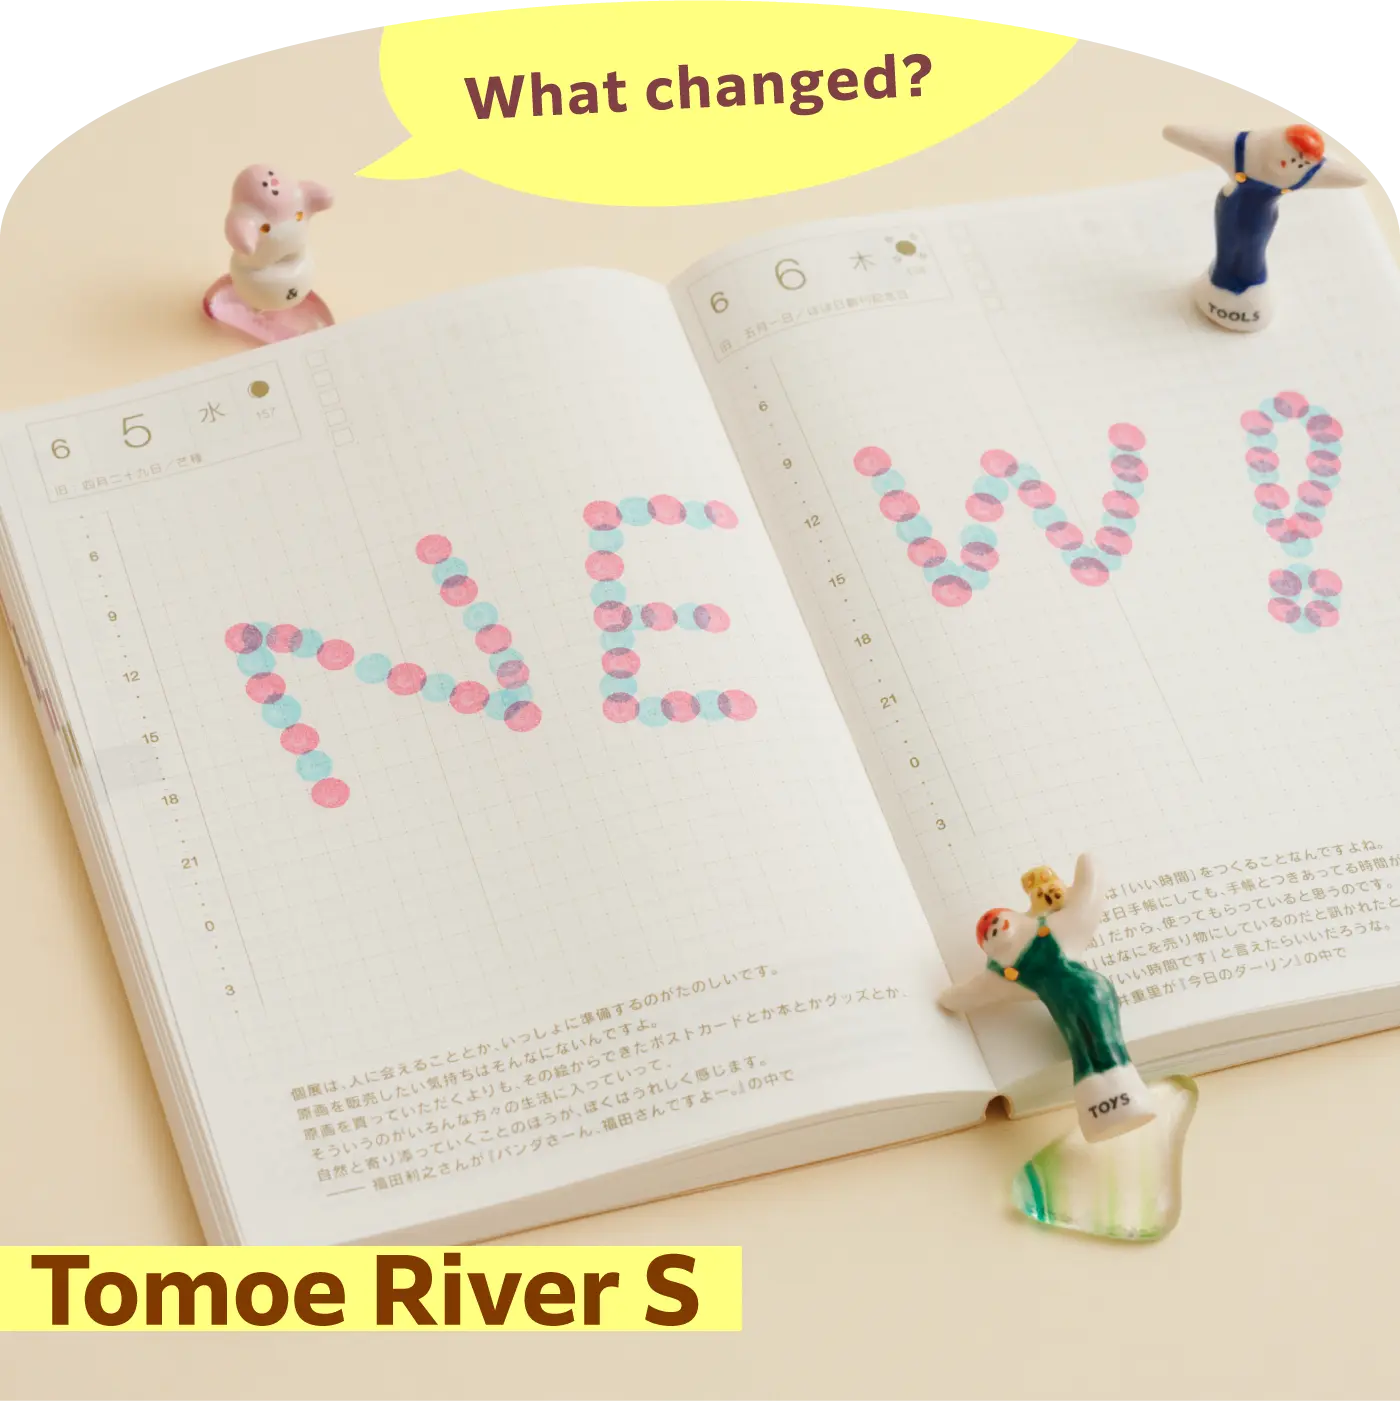 What changed? Tomoe River S